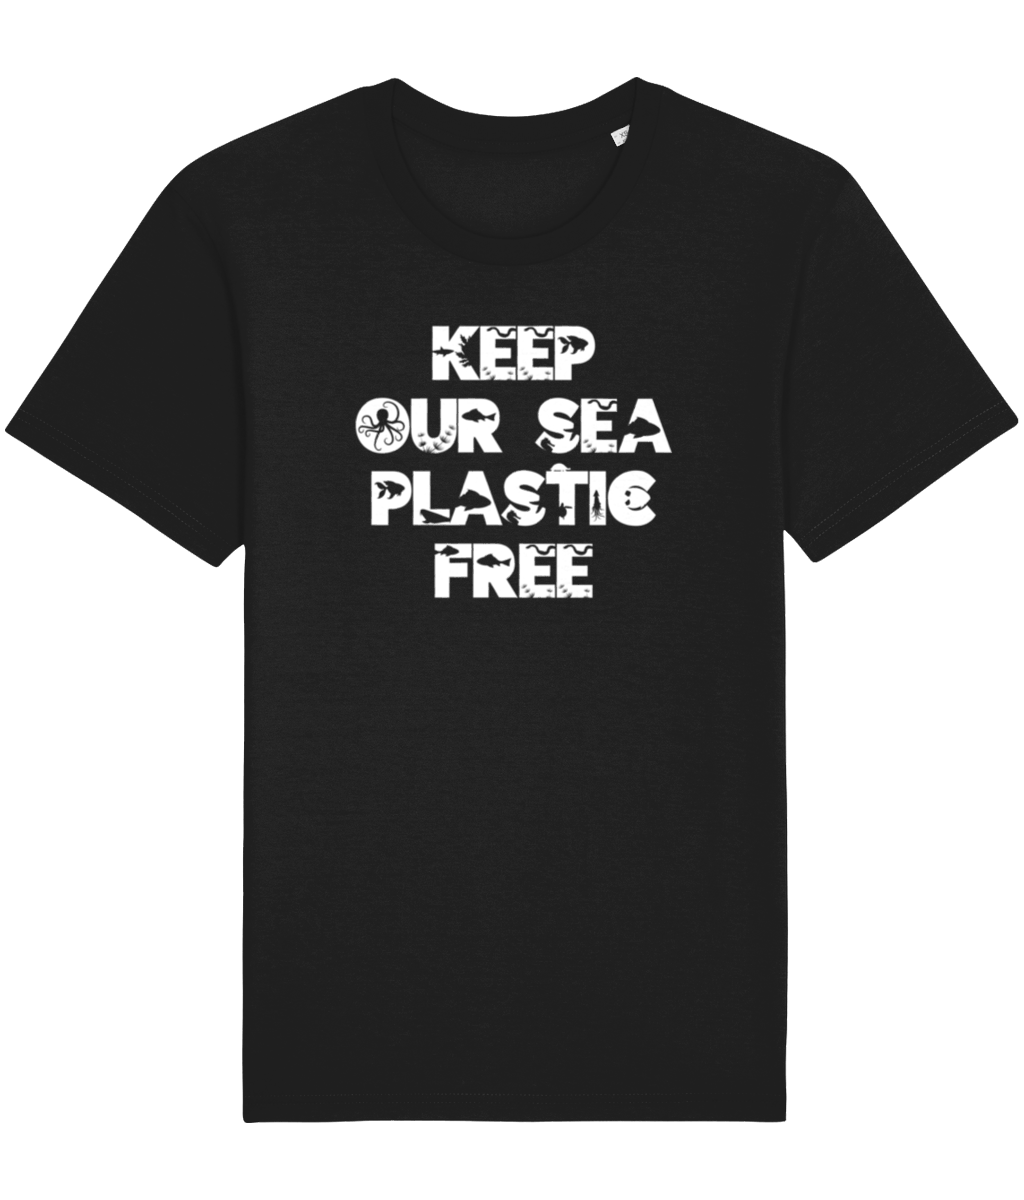 Black unisex vegan shirt with the words keep our sea plastic free